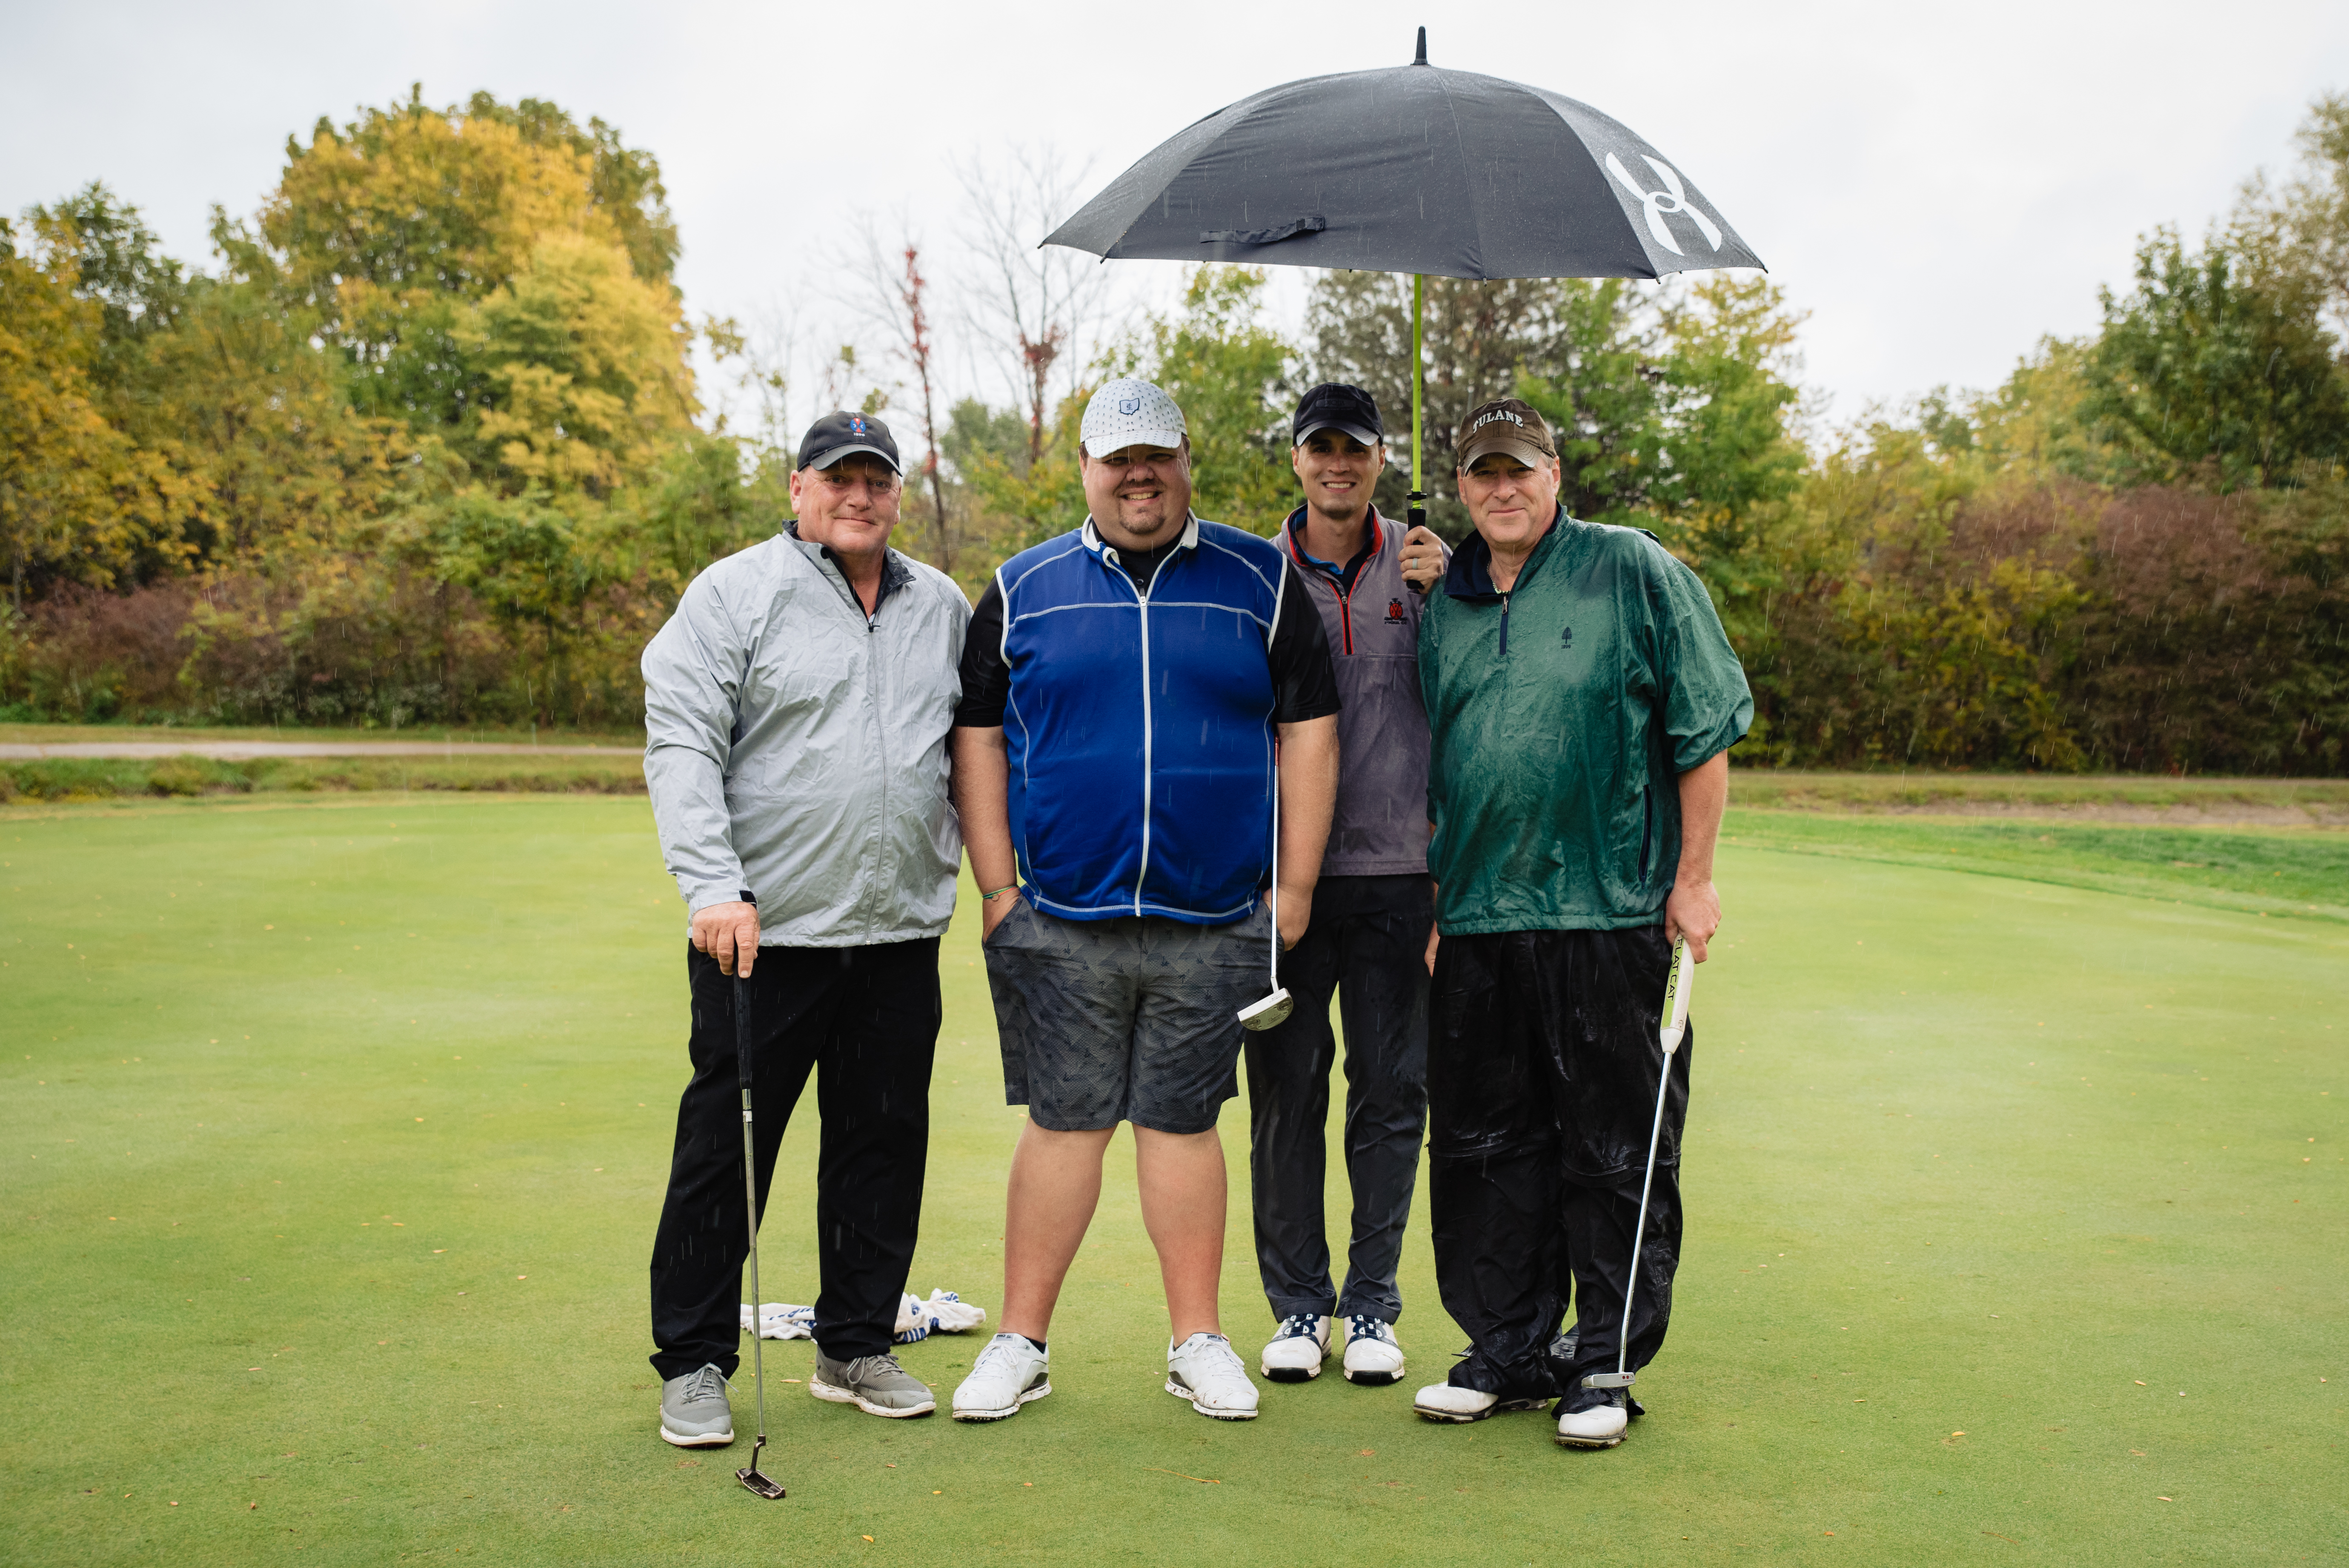 Dugan's Pawn Shop Team Sponsor for the Foundation Golf Outing 